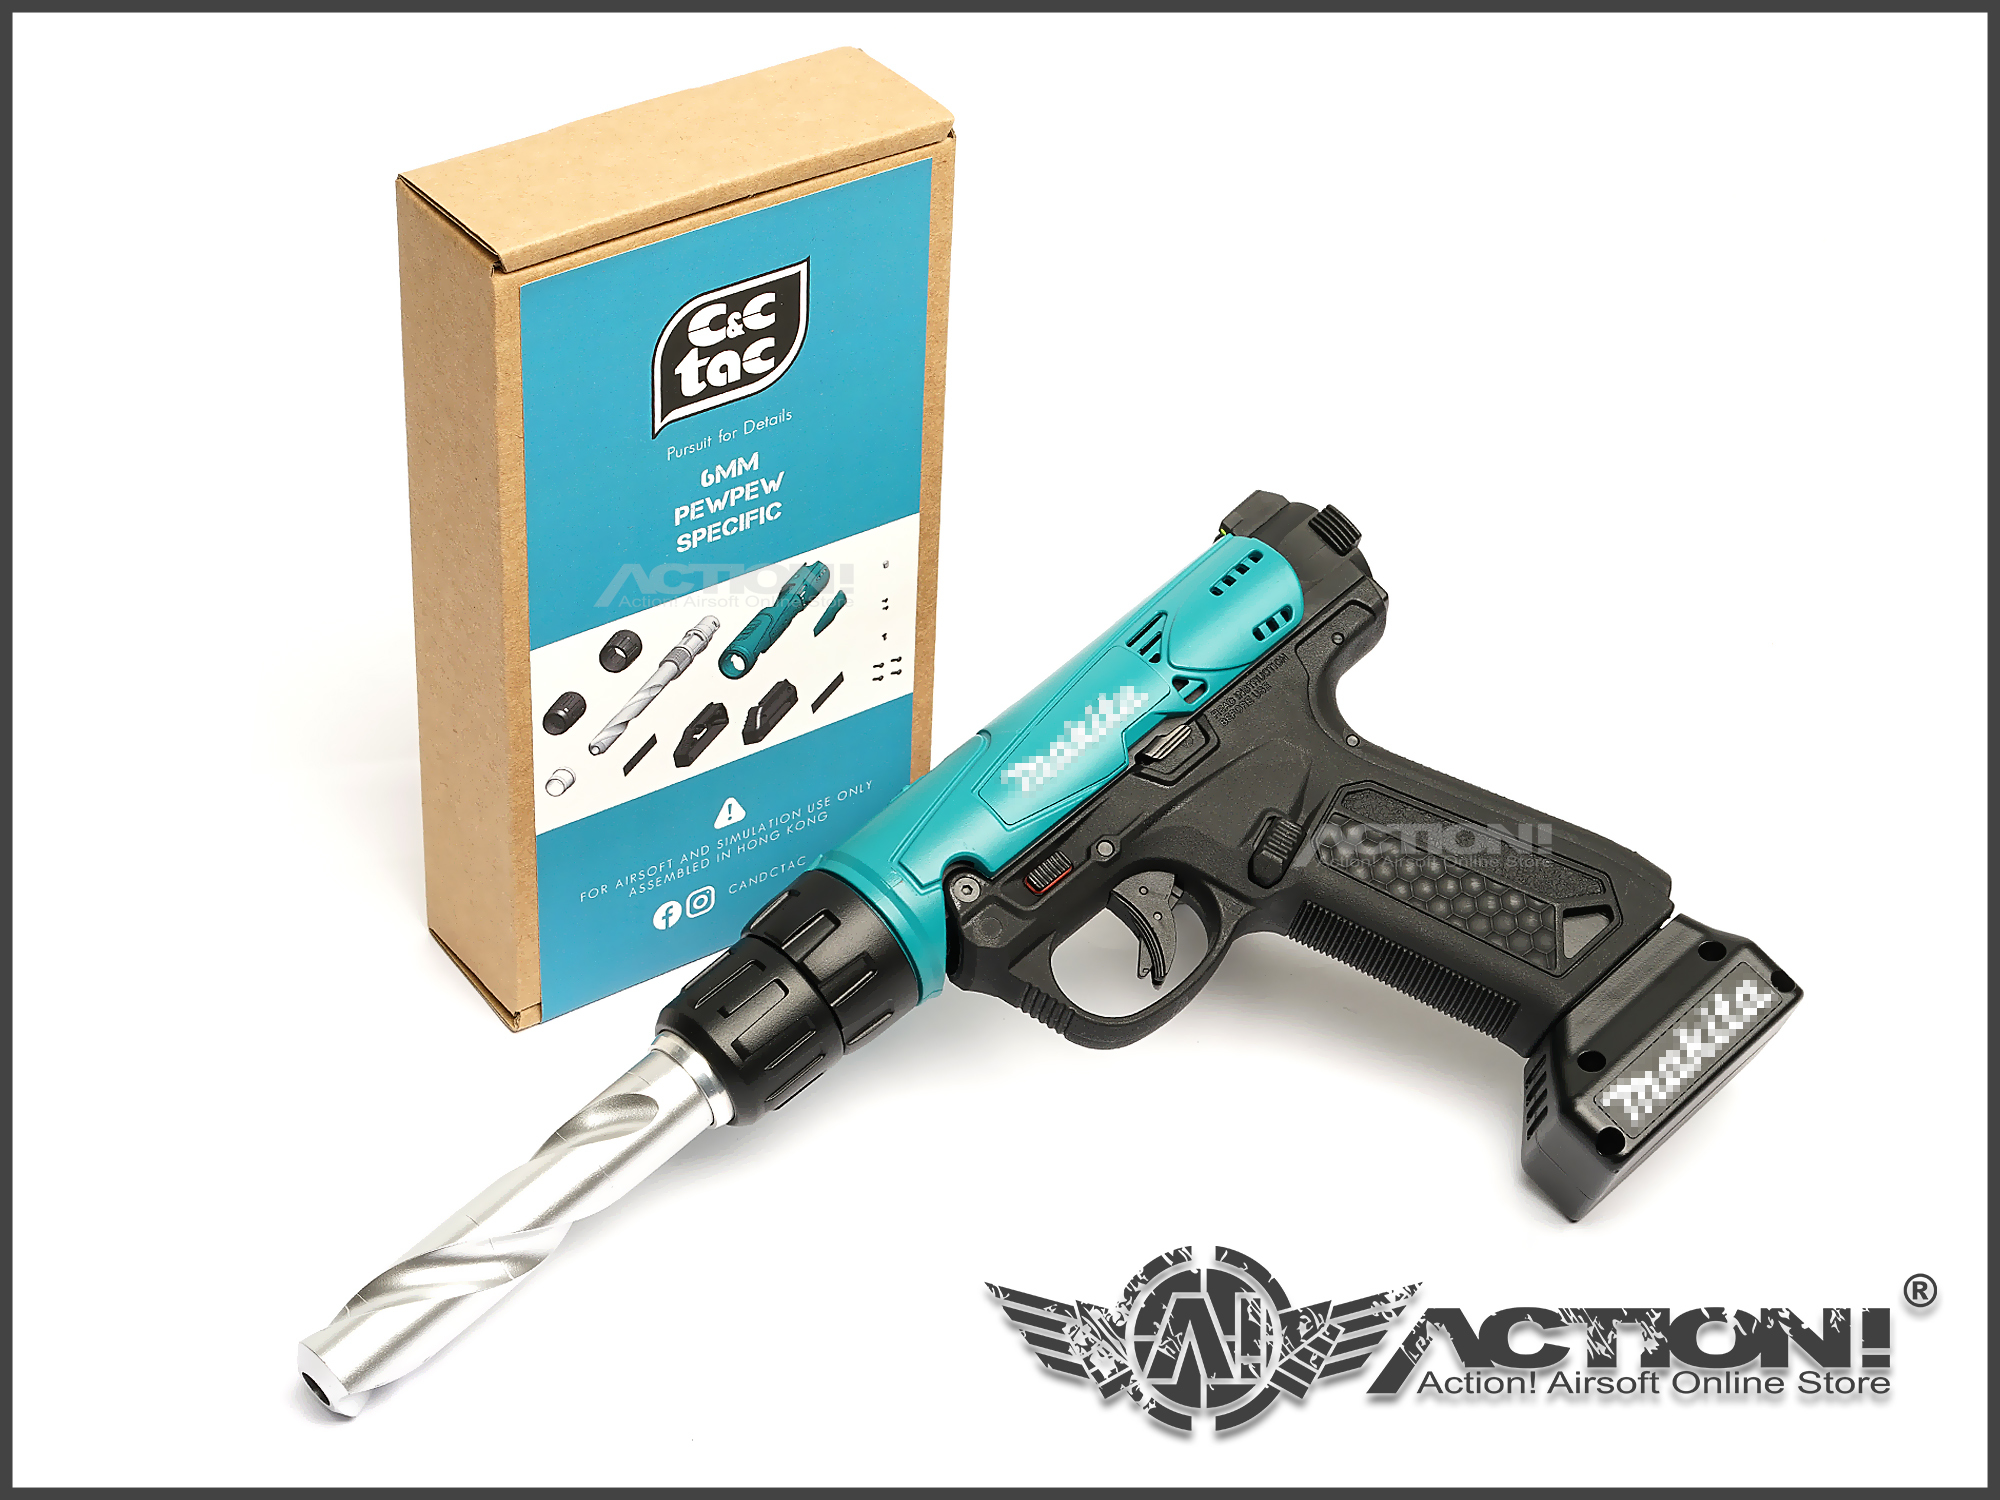 C&C TAC /ACTION ARMY - MAKITA Style AAP01瓦斯手槍